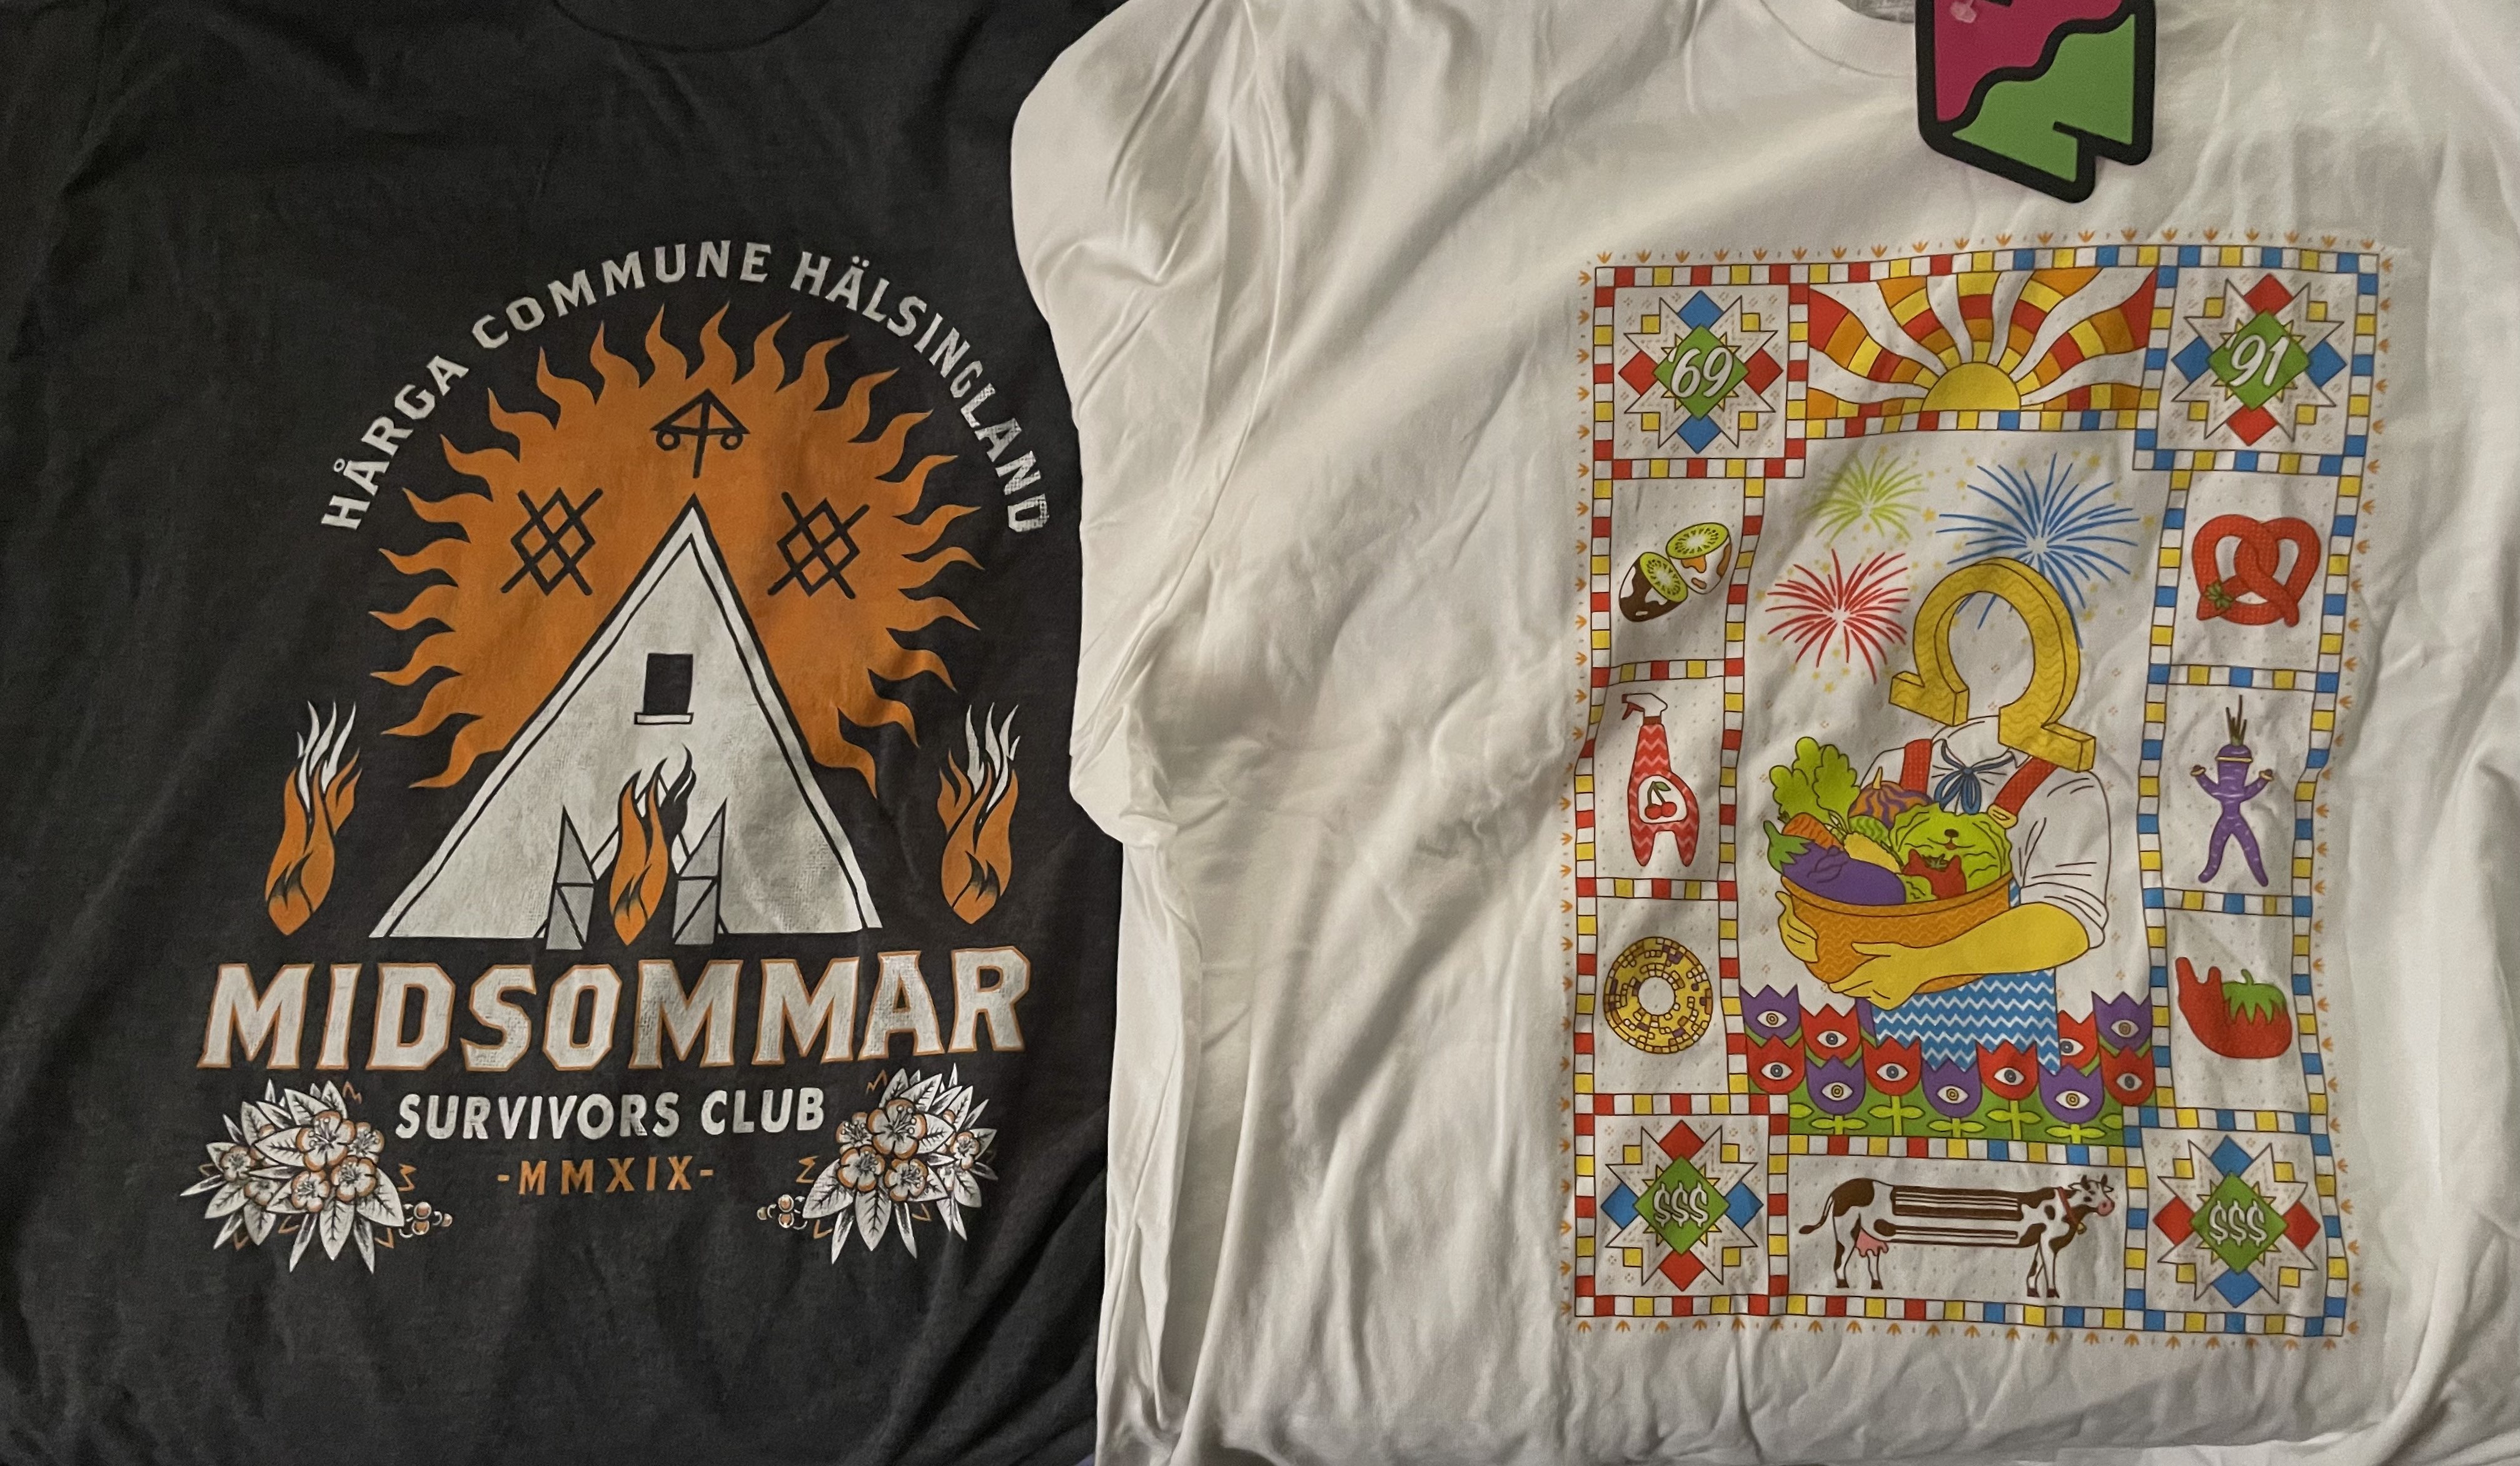 AN IMAGE OF TWO OF THE SHIRTS I RECIEVED FOR MY BIRTHDAY. ON THE LEFT IS A MIDSOMMAR PRINT WITH THE TENT IN THE MIDDLE. THE TOP CAPTION READS 'Hårga COMMUNE HÄLSINGLAND' WHILE THE BOTTOM CAPTION READS 'MIDSOMMAR, SURVIVORS CLUB, MMXIX'. FLAMES, FLOWERS AND RELEVANT RUNES ARE ALSO ON THE PRINT. THE SHIRT ON THE RIGHT IS OF MEOW WOLF OMEGAMART'S MASCOT MR. OMEGA, HOLDING A BASKET OF VEGETABLES. SEVERAL OTHER OMEGAMART-RELEVANT GRAPHICS SURROUND HIM IN A QUILT PATTERN, INCLUDING THE LONG COW, A DAIKON, THE CHERRY BLITZ SPRAY AND MORE.